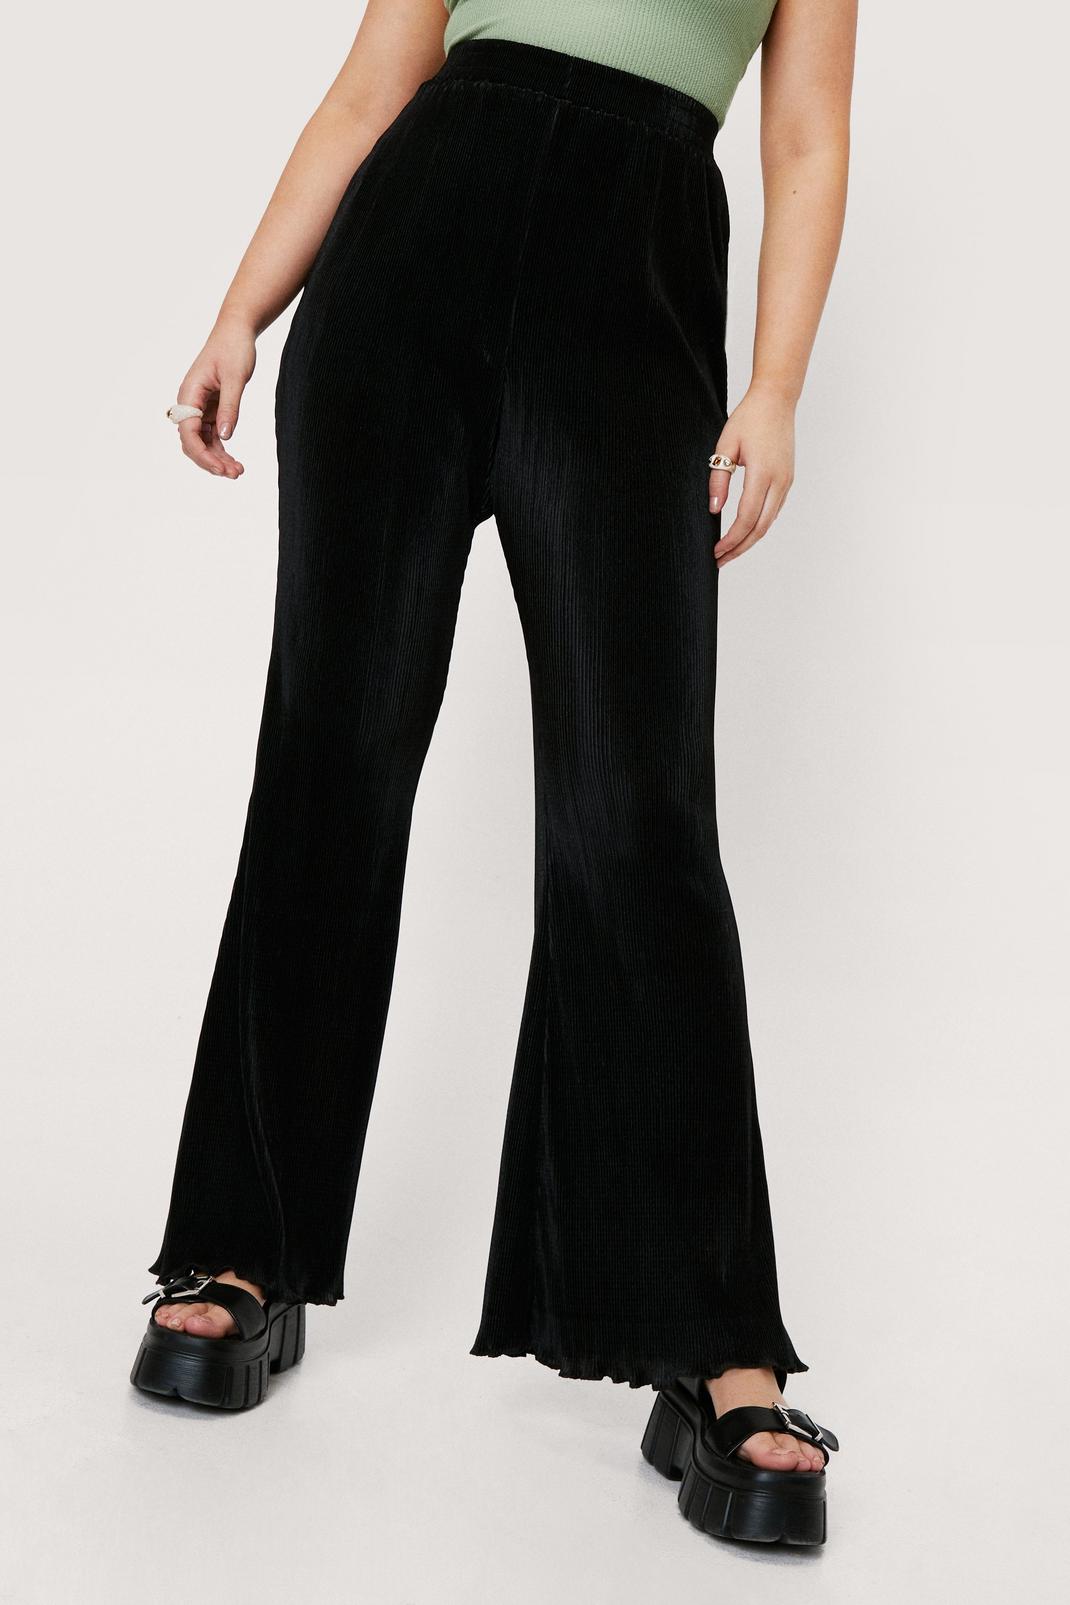 Plus Size Plisse High Waisted Flare Pants | Nasty Gal